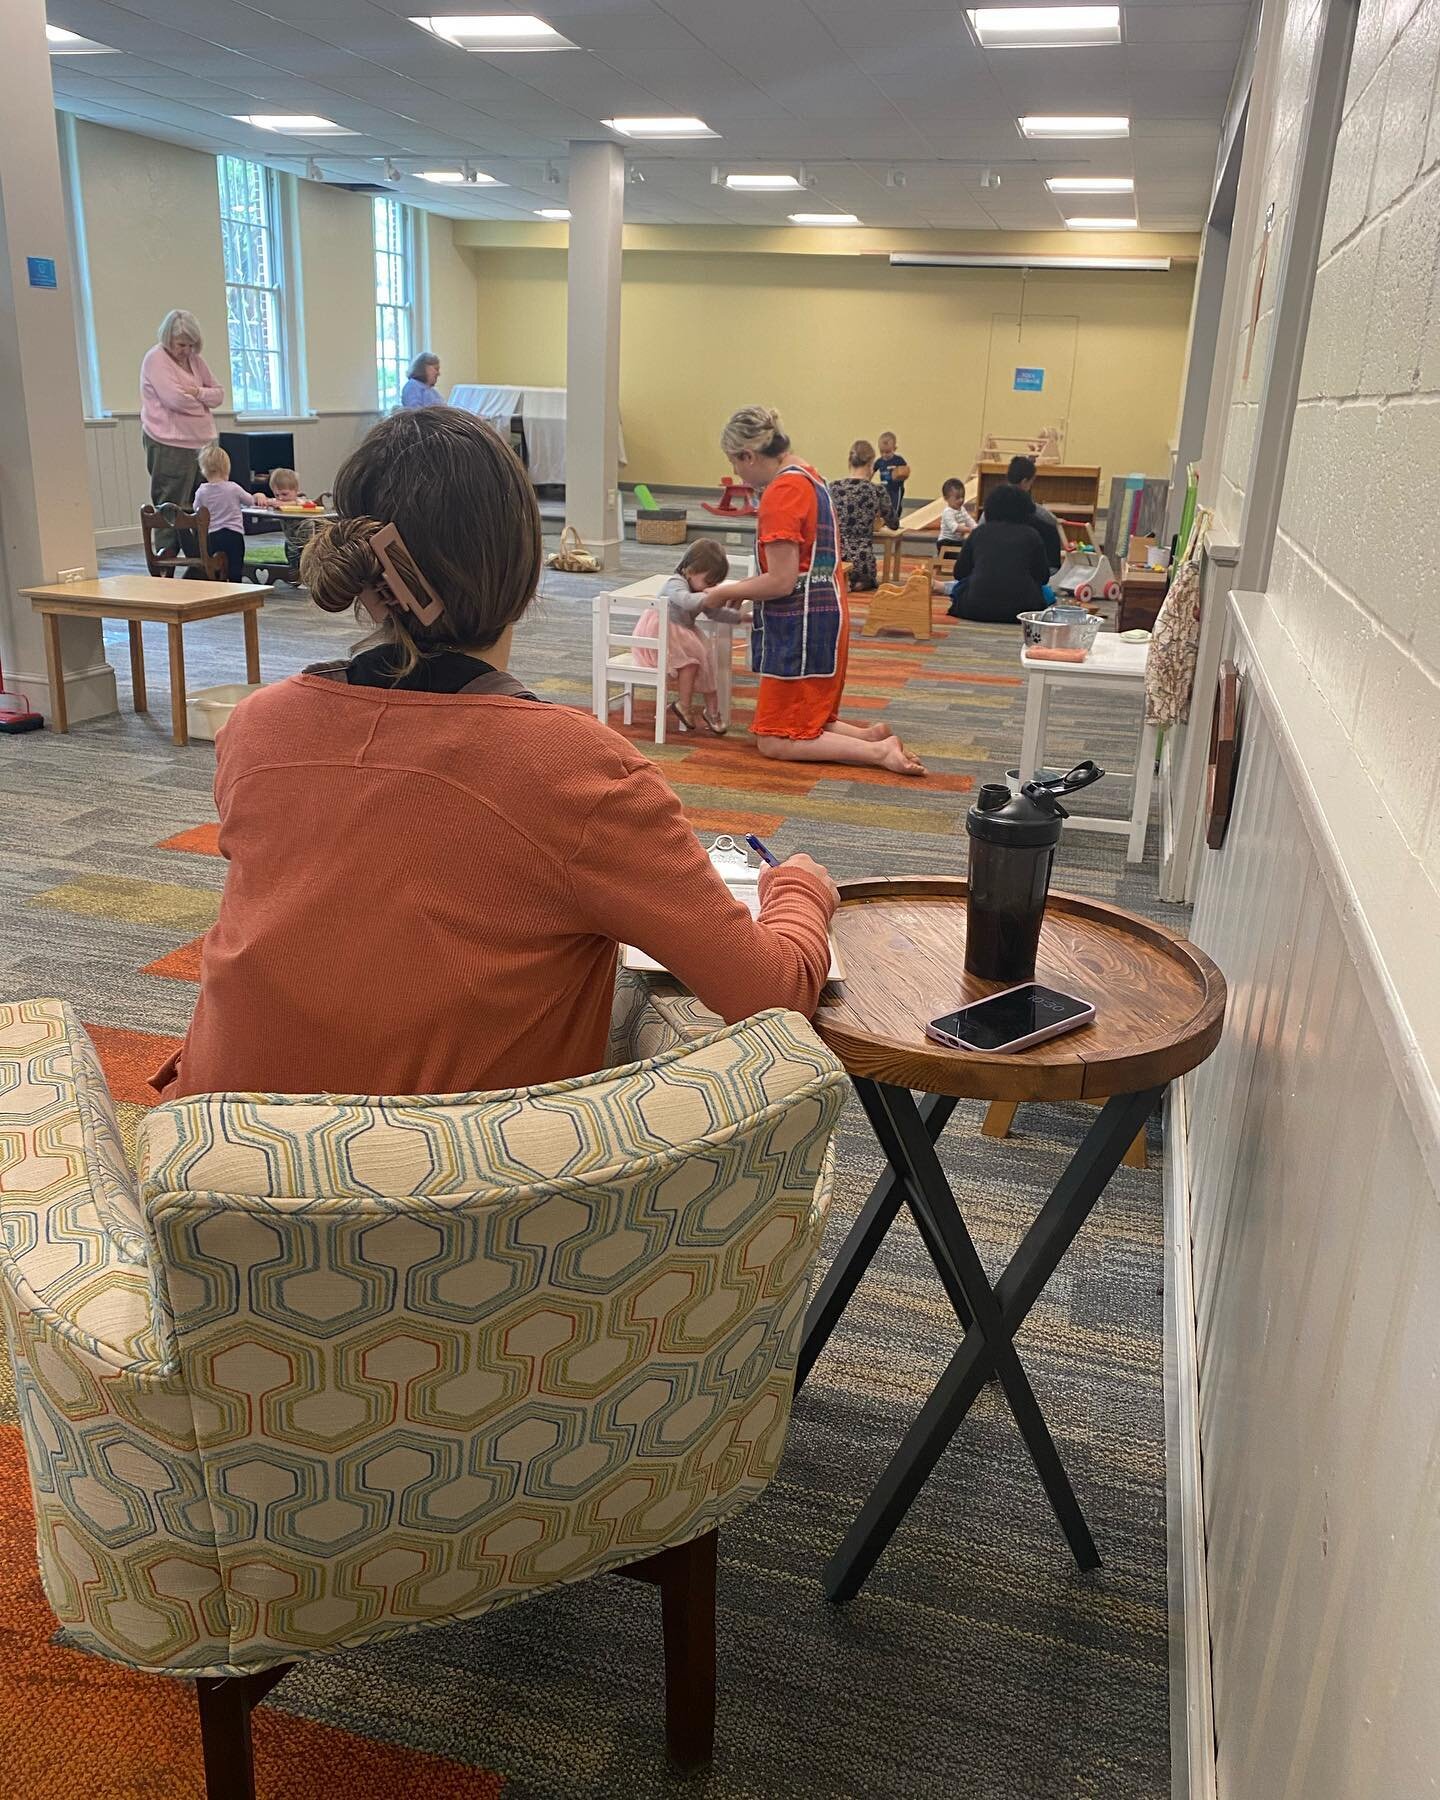 This week we invited our caregivers to take time for a formal observation. We put out several chairs around the room for adults to sit in along with clipboards, paper and pen. Sitting back and taking the time to truly watch your child with intention 